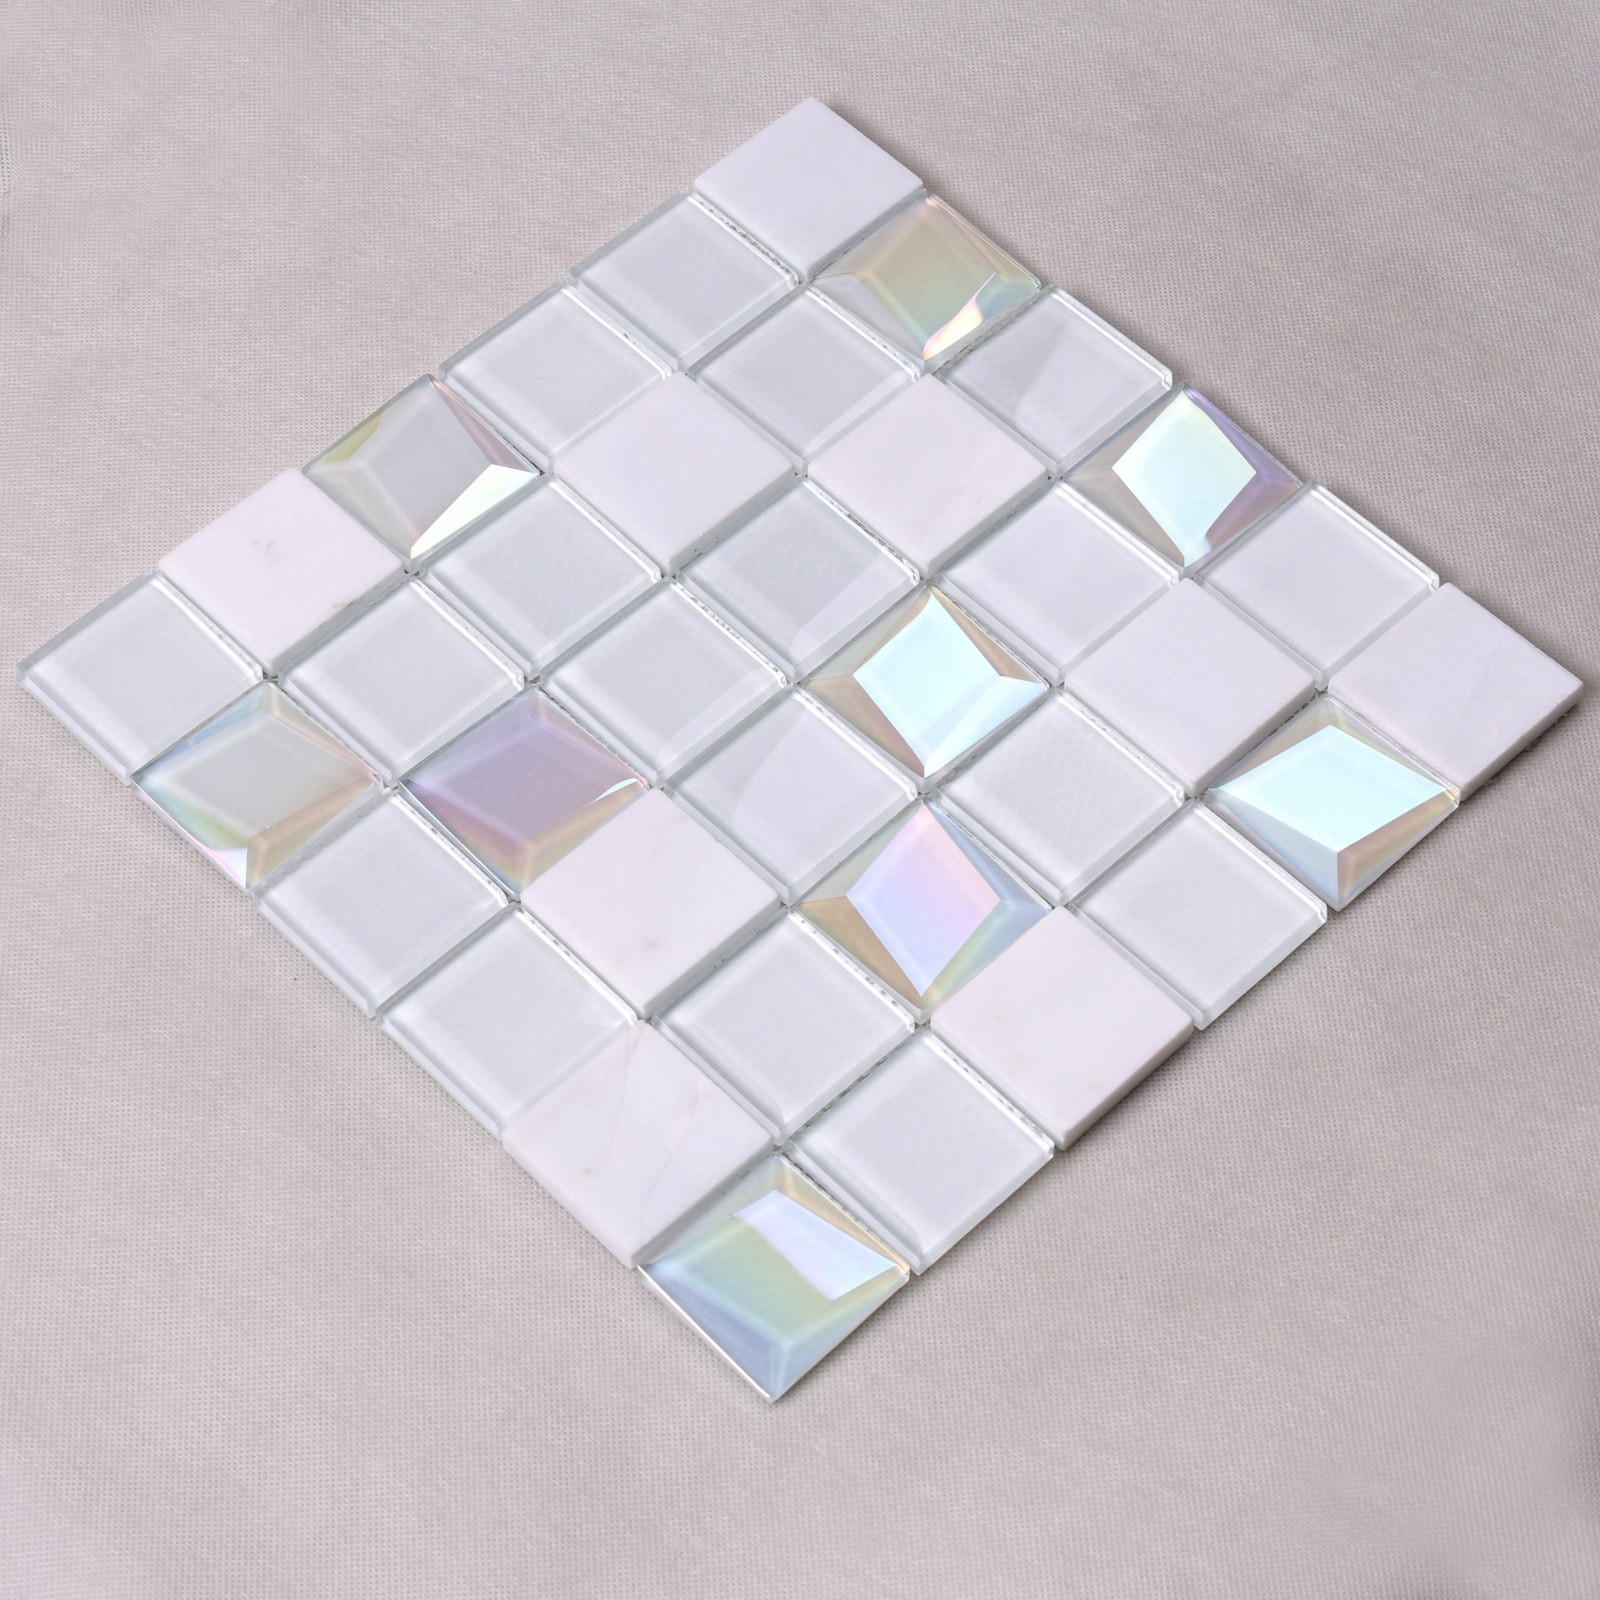 Heng Xing Best 1x1 glass tile sheets factory price for kitchen-2